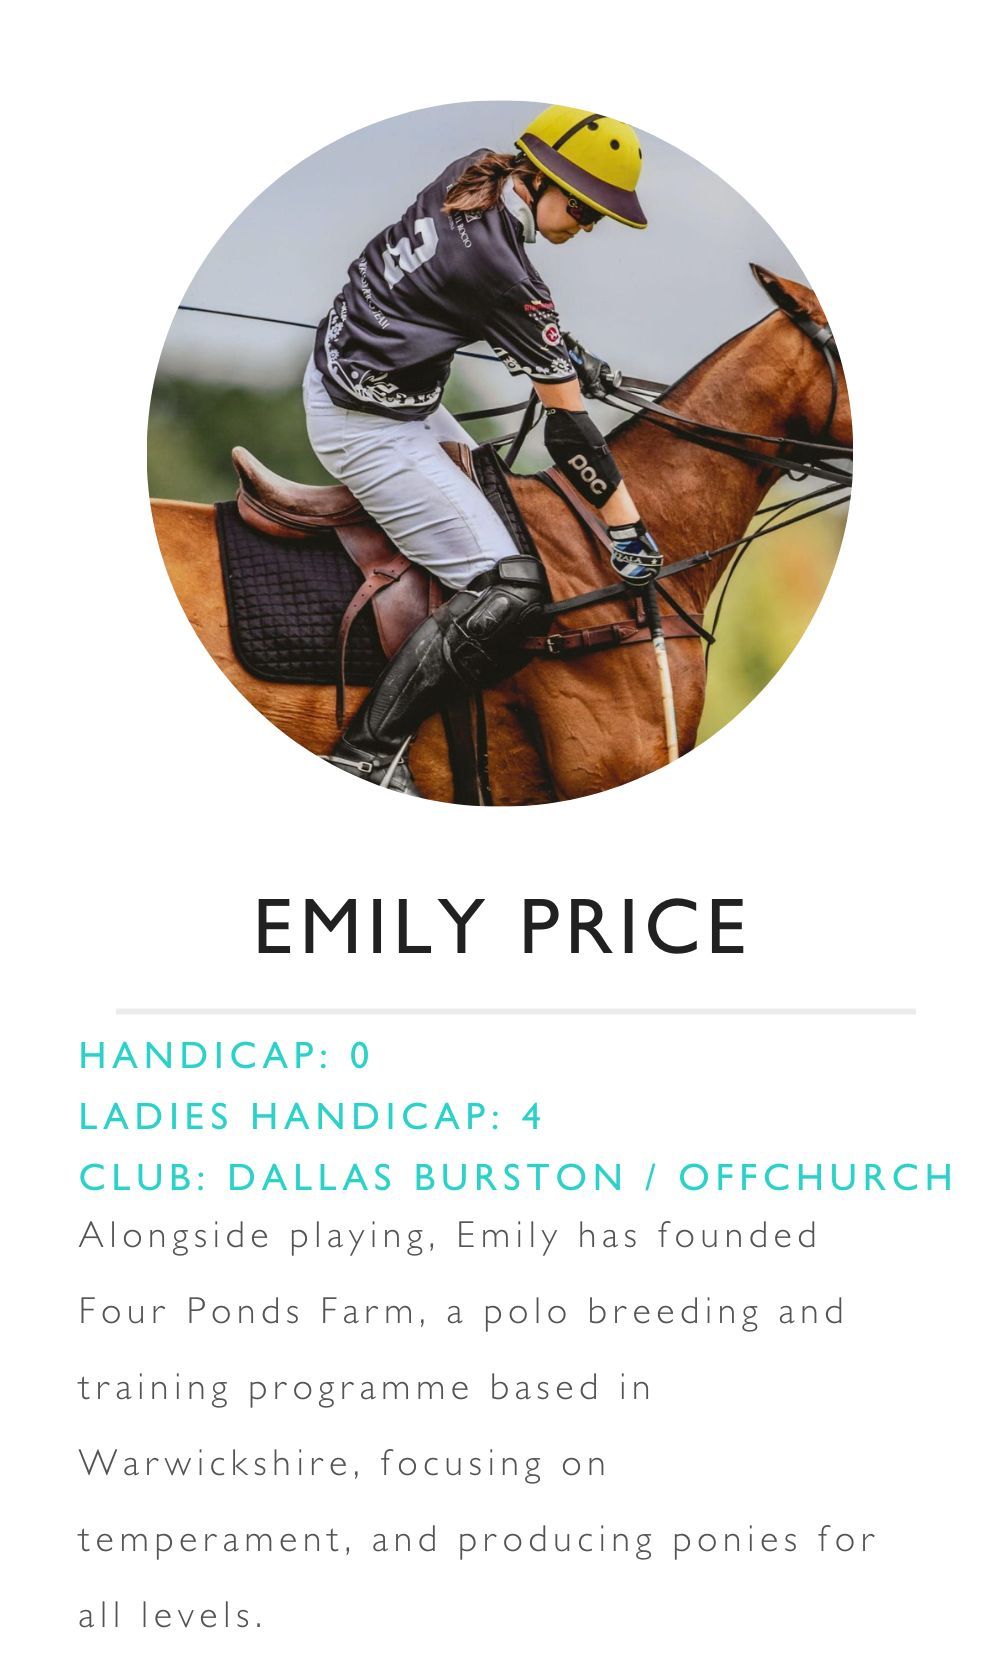 a poster for emily price shows a woman riding a horse